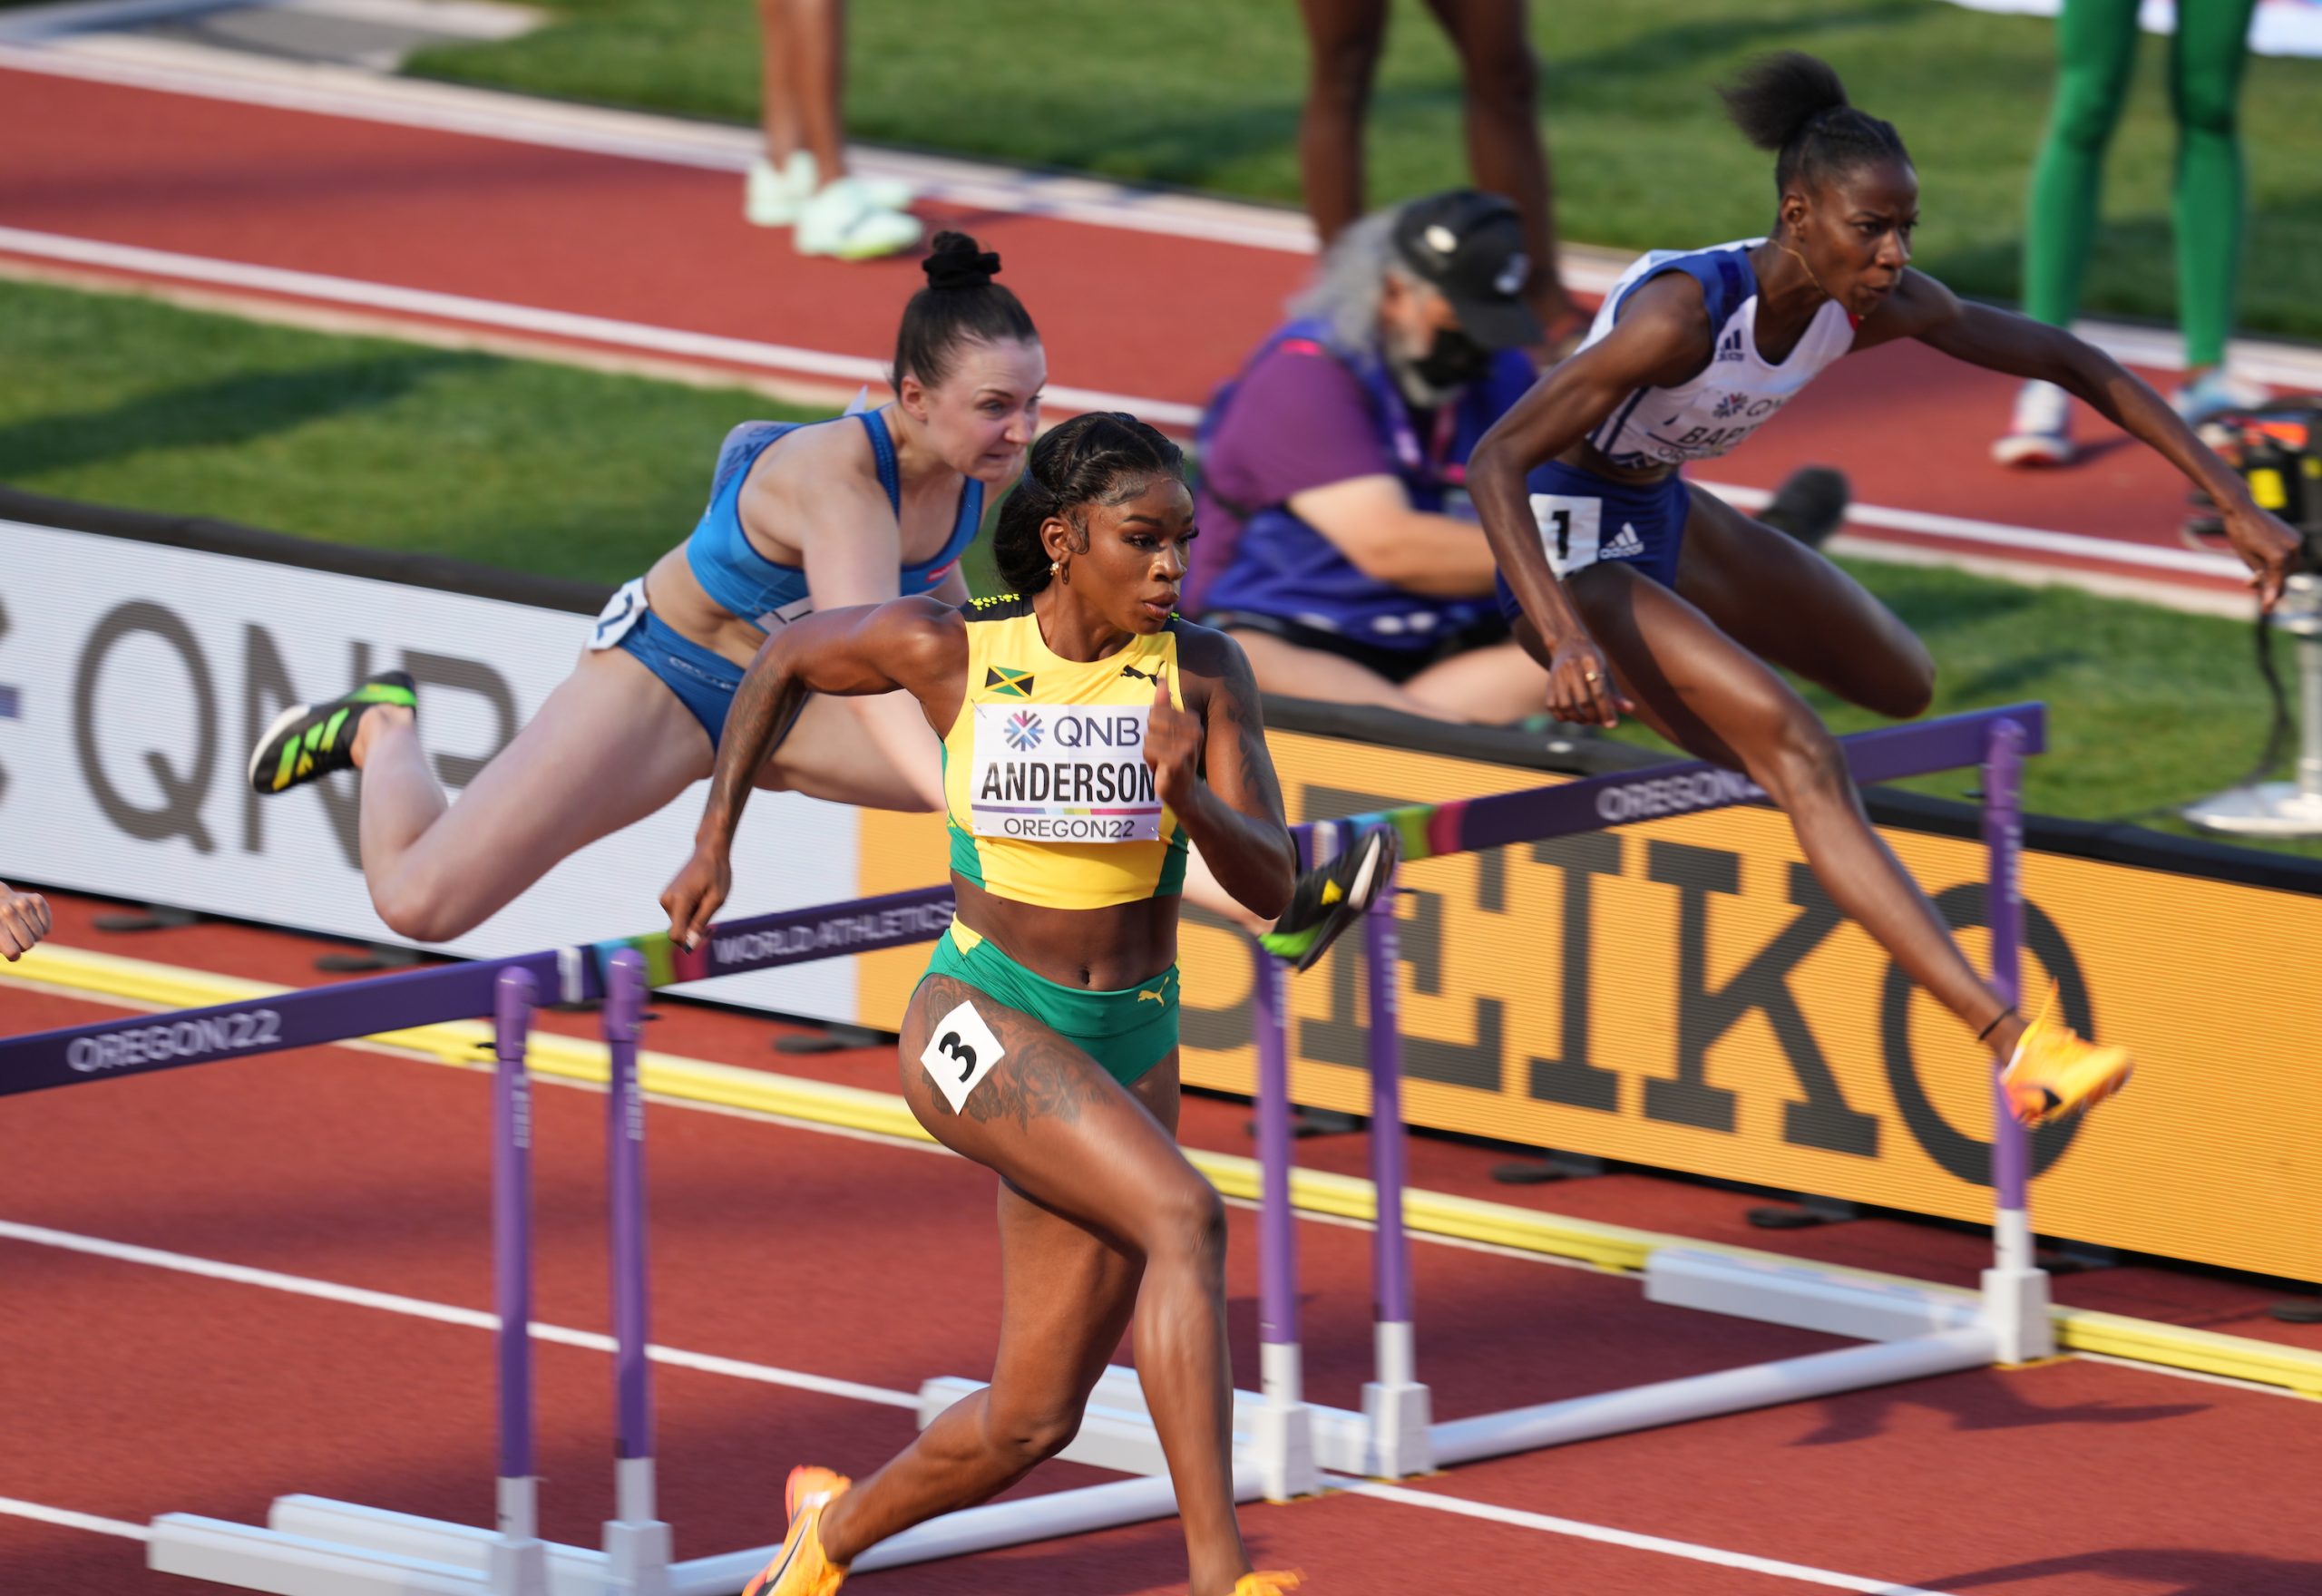 Britany Anderson runs a new Jamaica record of 12.31 to qualify for the final of the women's 100m hurdles at the Oregon22 World Athletics Championships